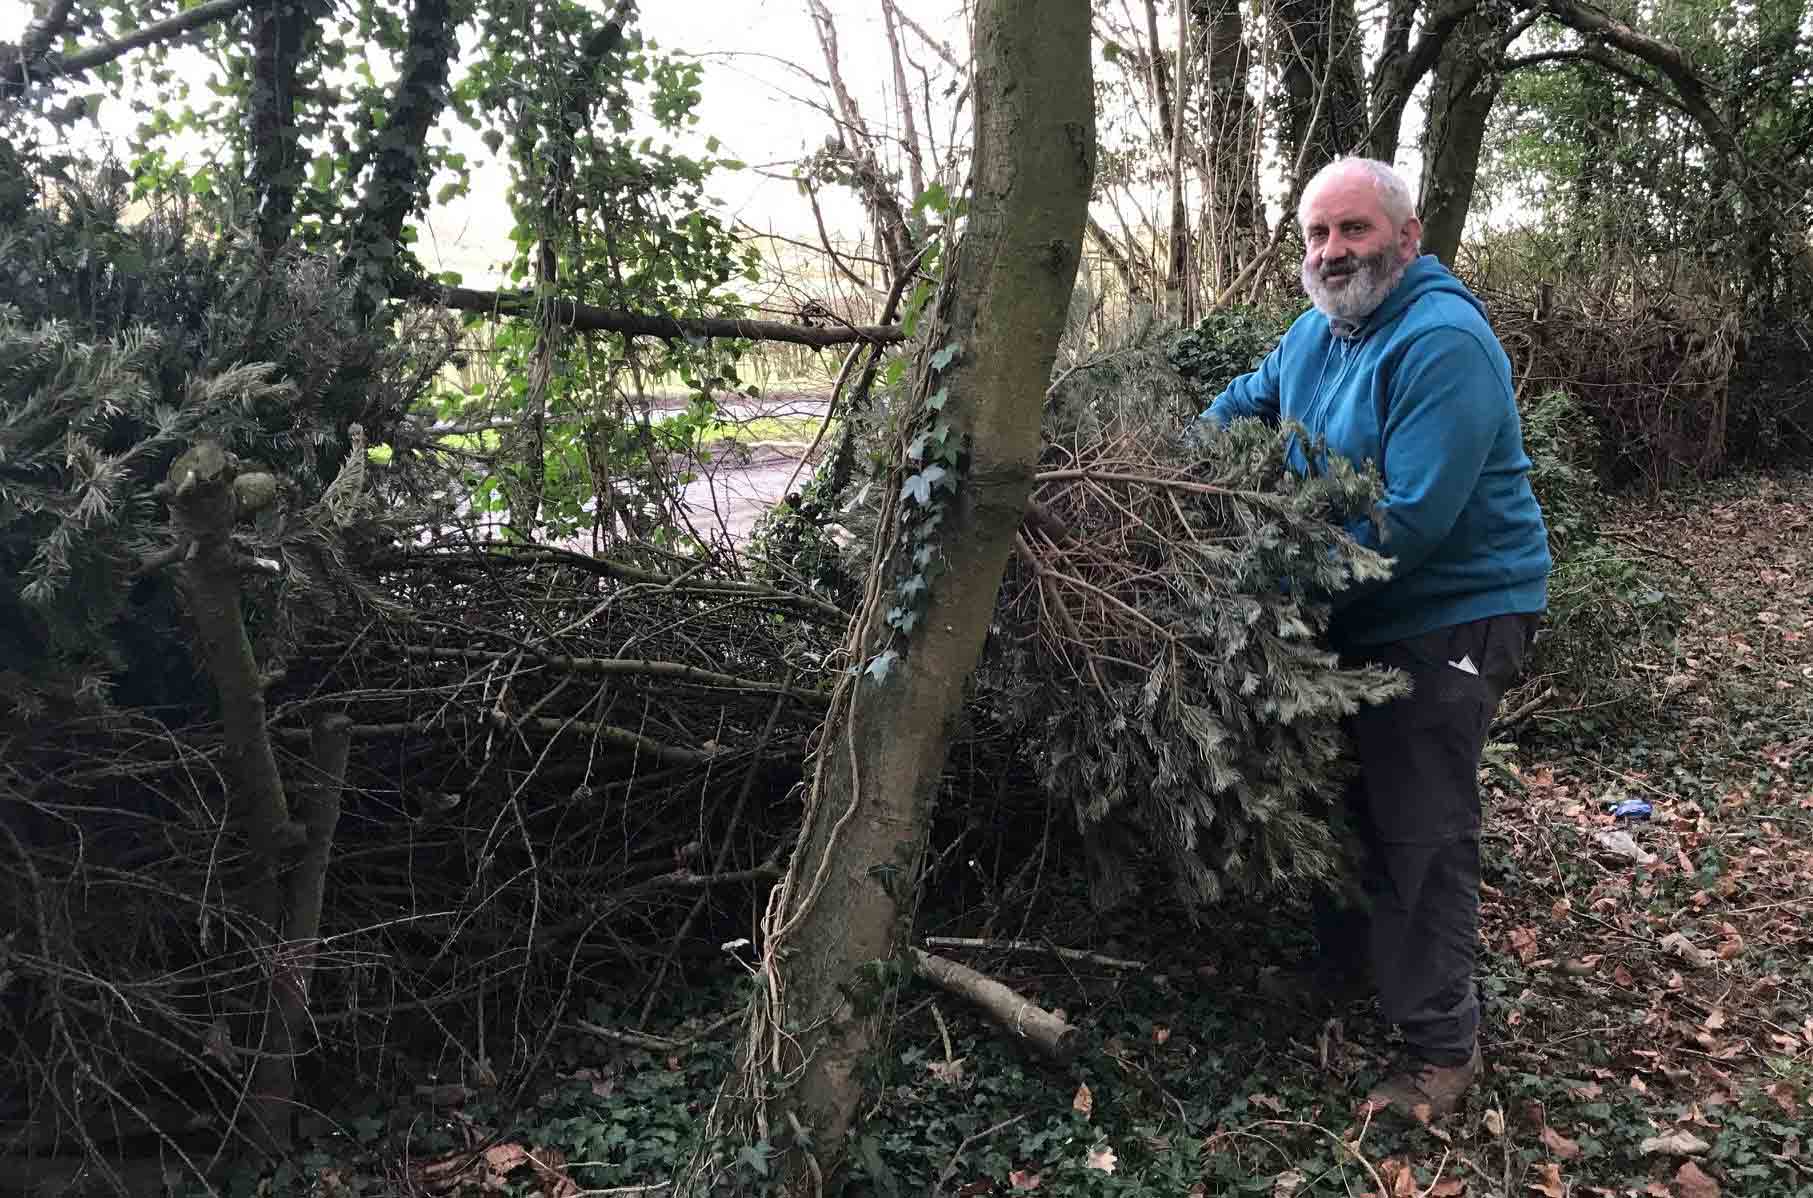 Branching Out! Ripon Community Link member Adrian Kitching making fences with old Christmas trees at Ripon Walled Garden